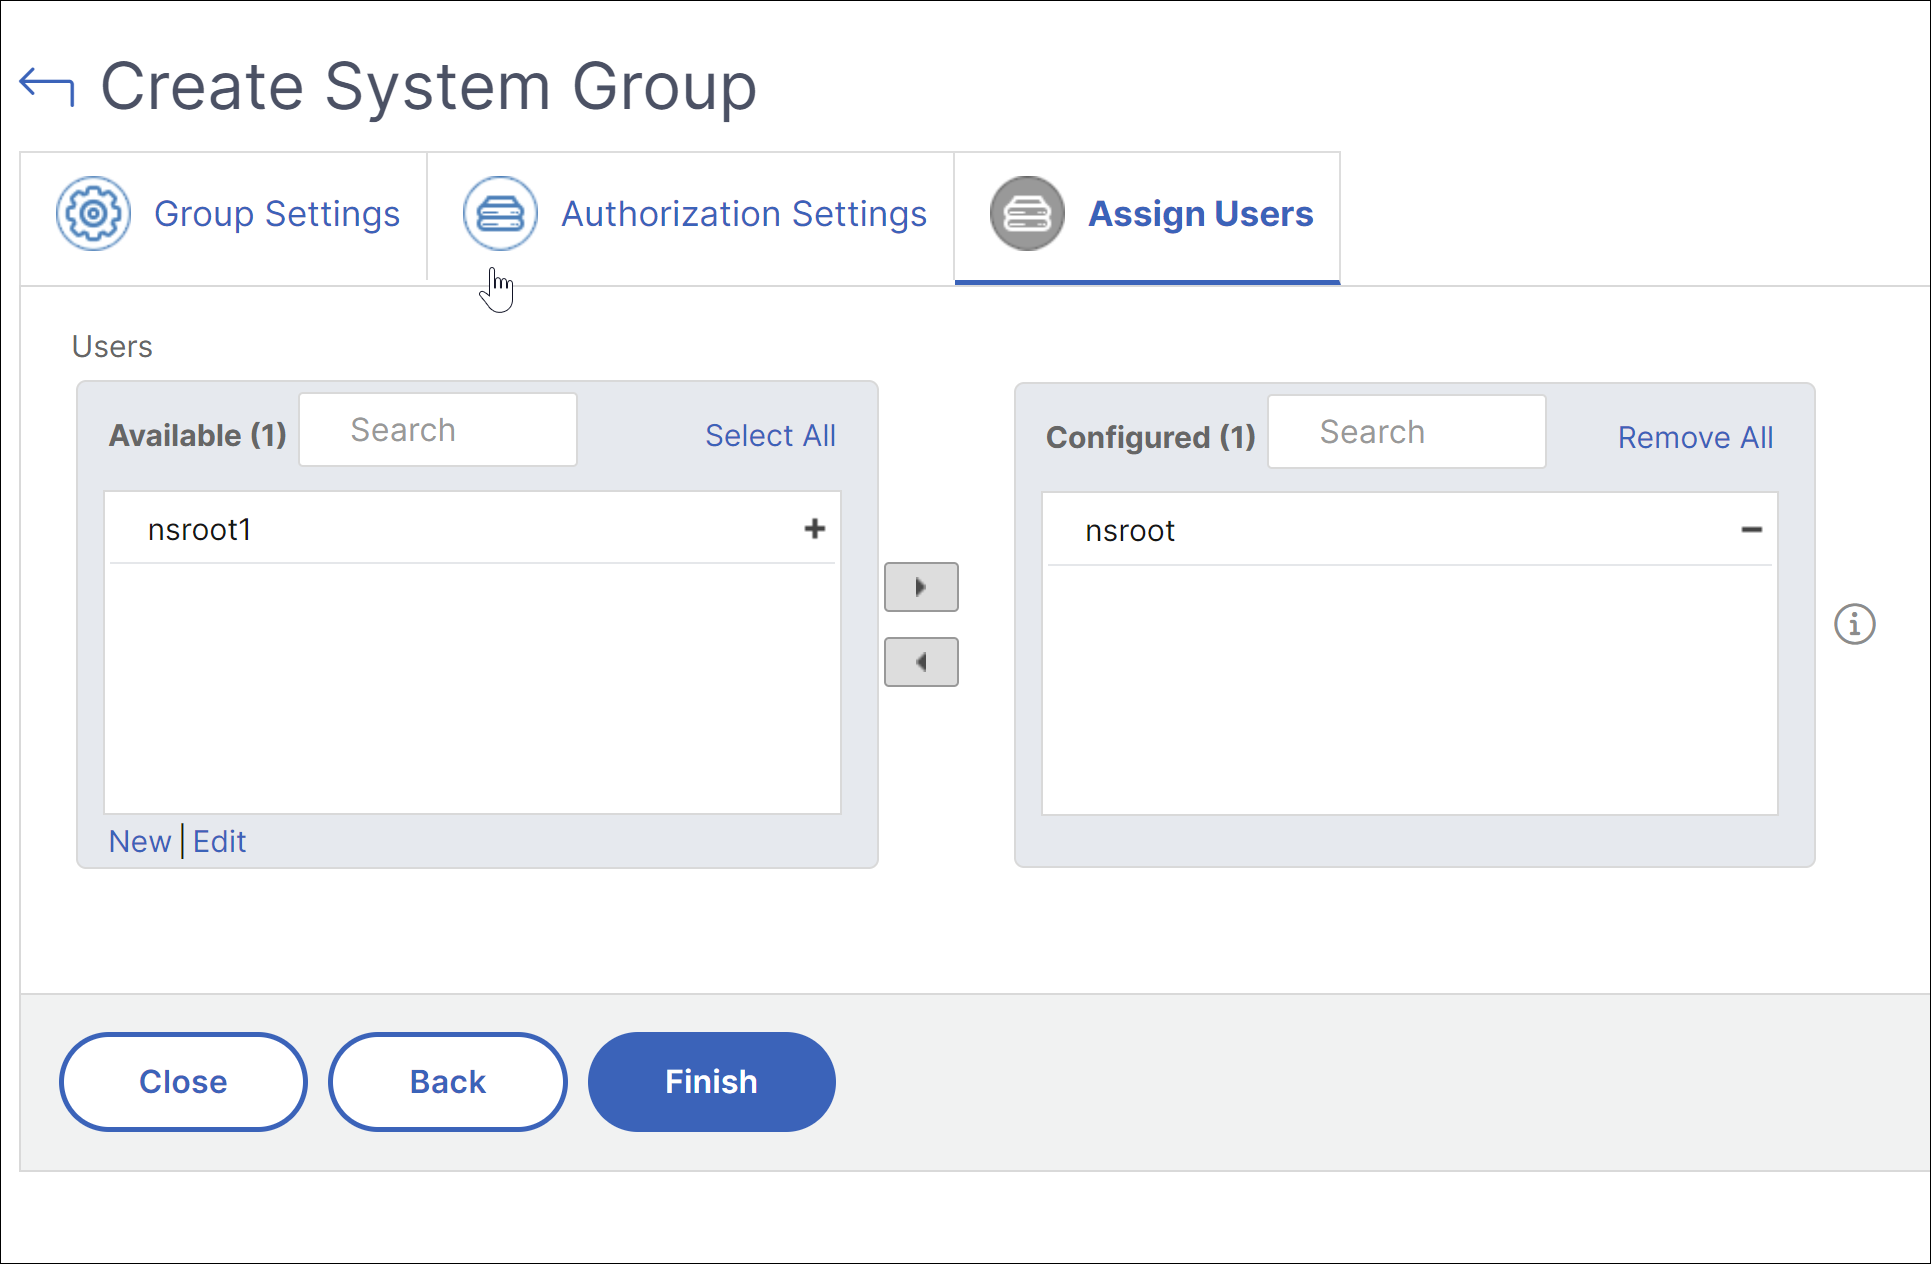 Example to create a system group